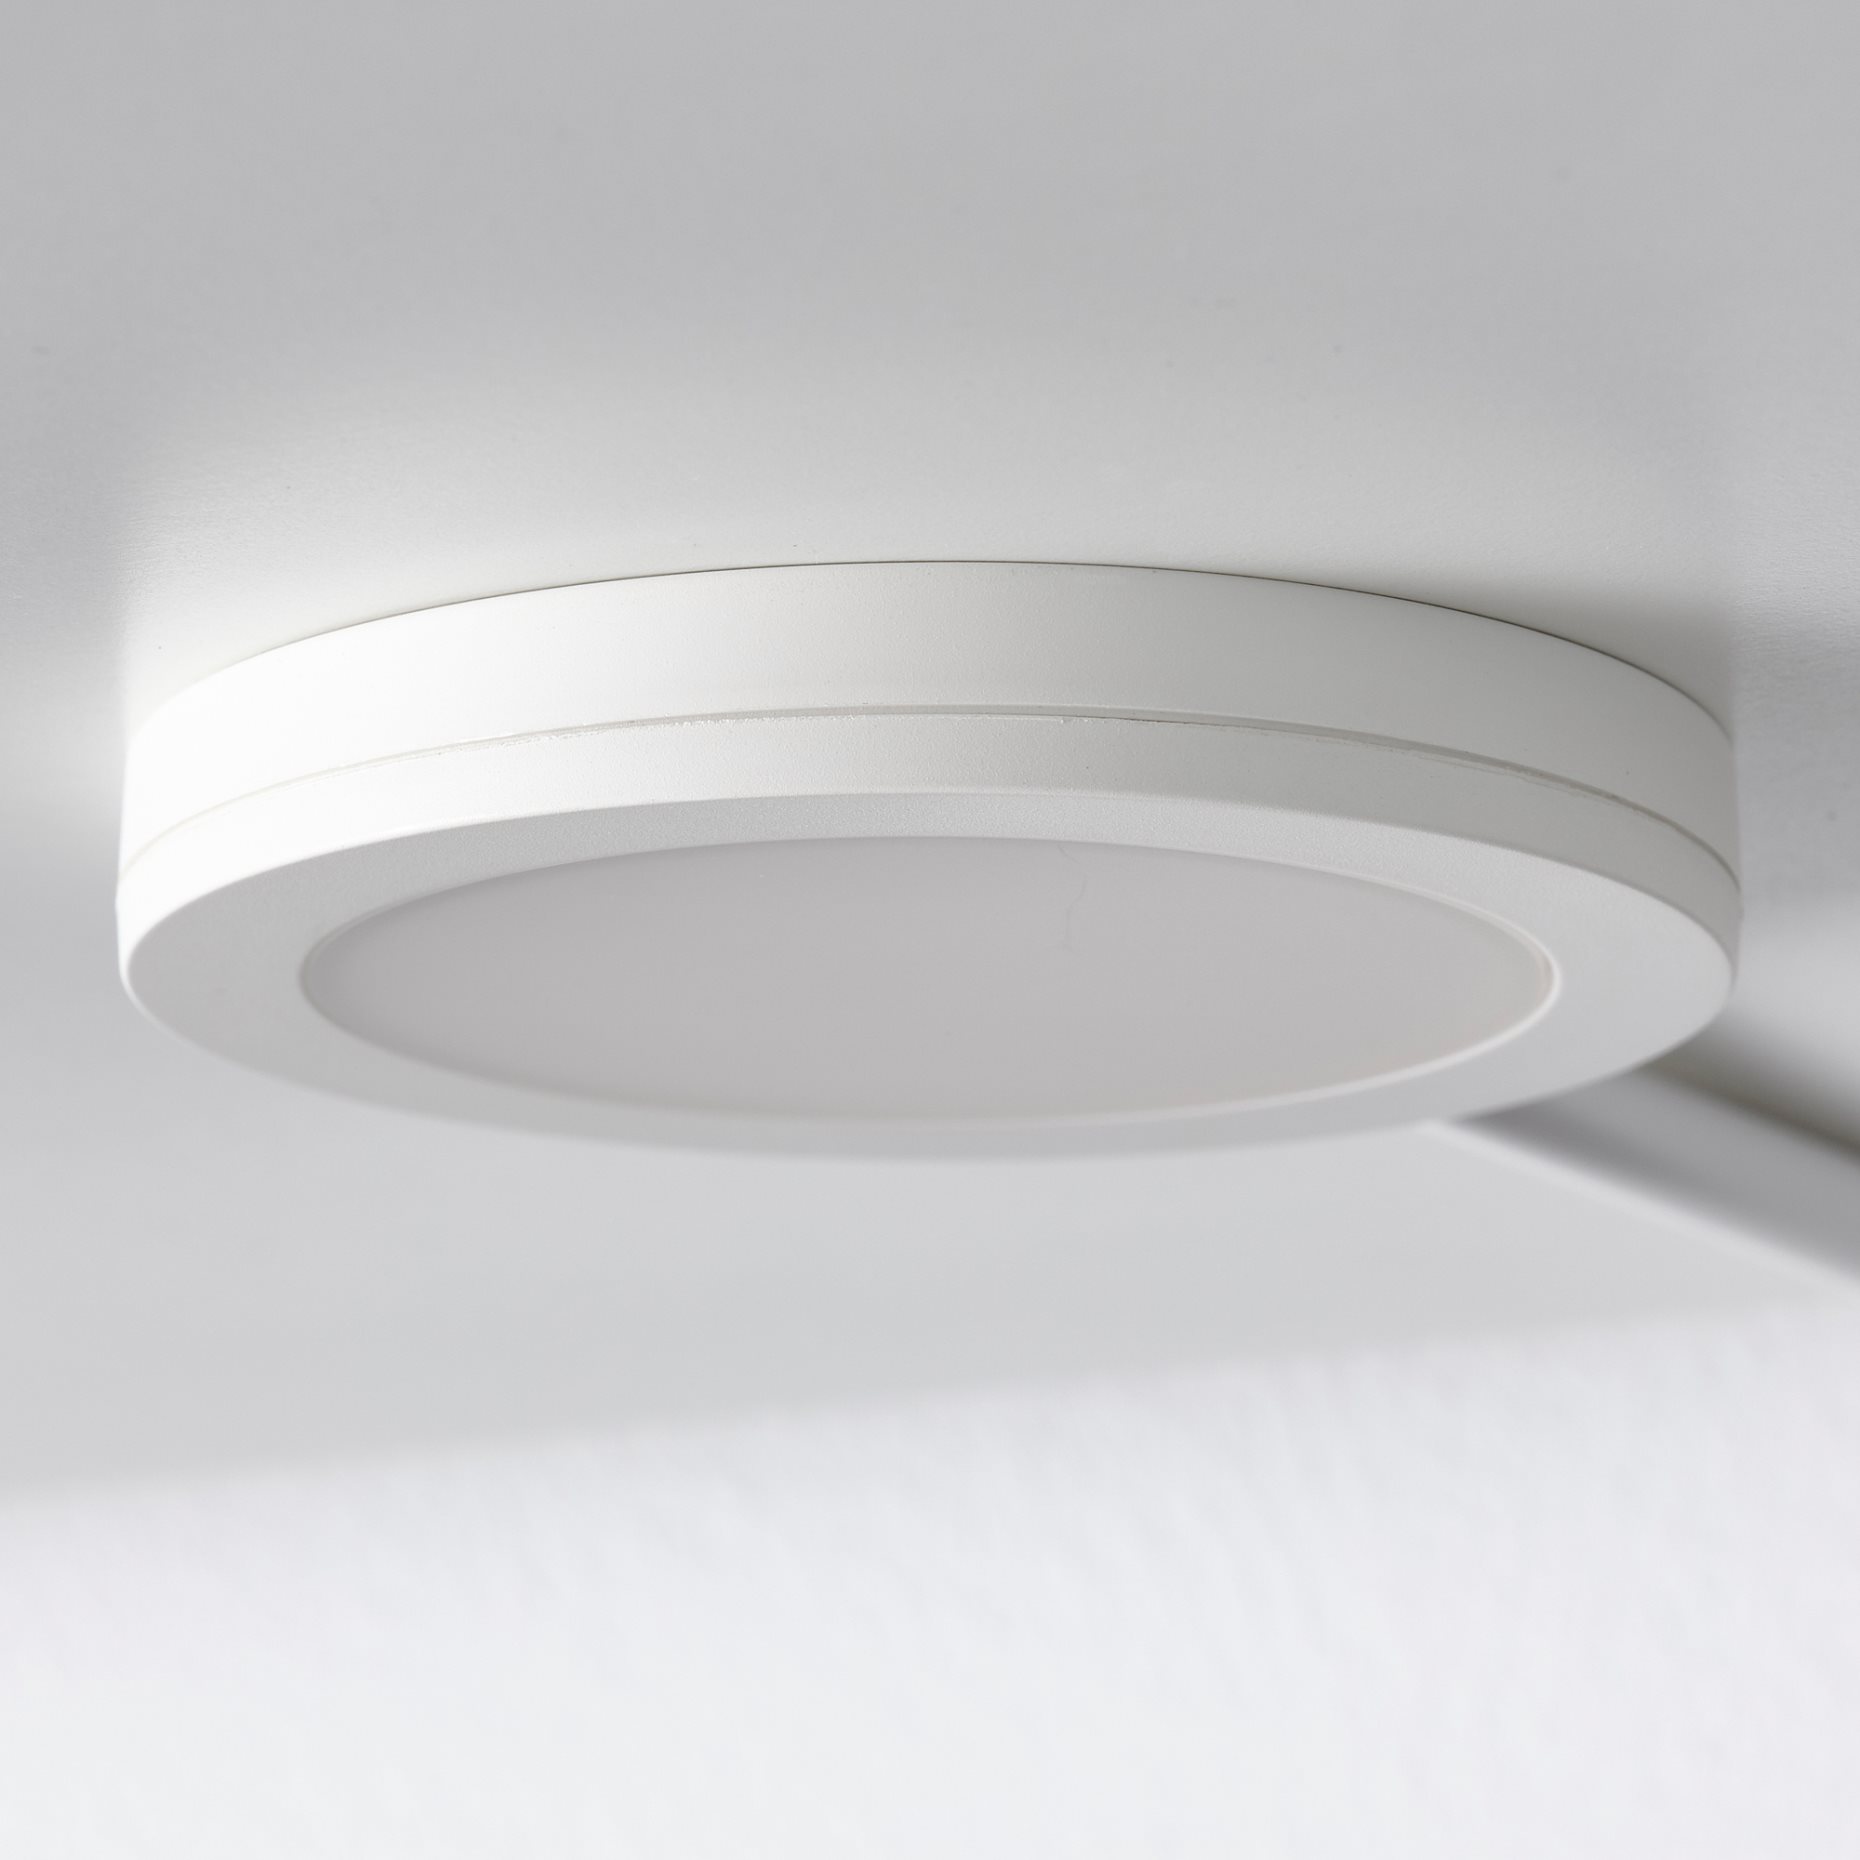 MITTLED, spotlight with built-in LED light source/dimmable, 005.286.62